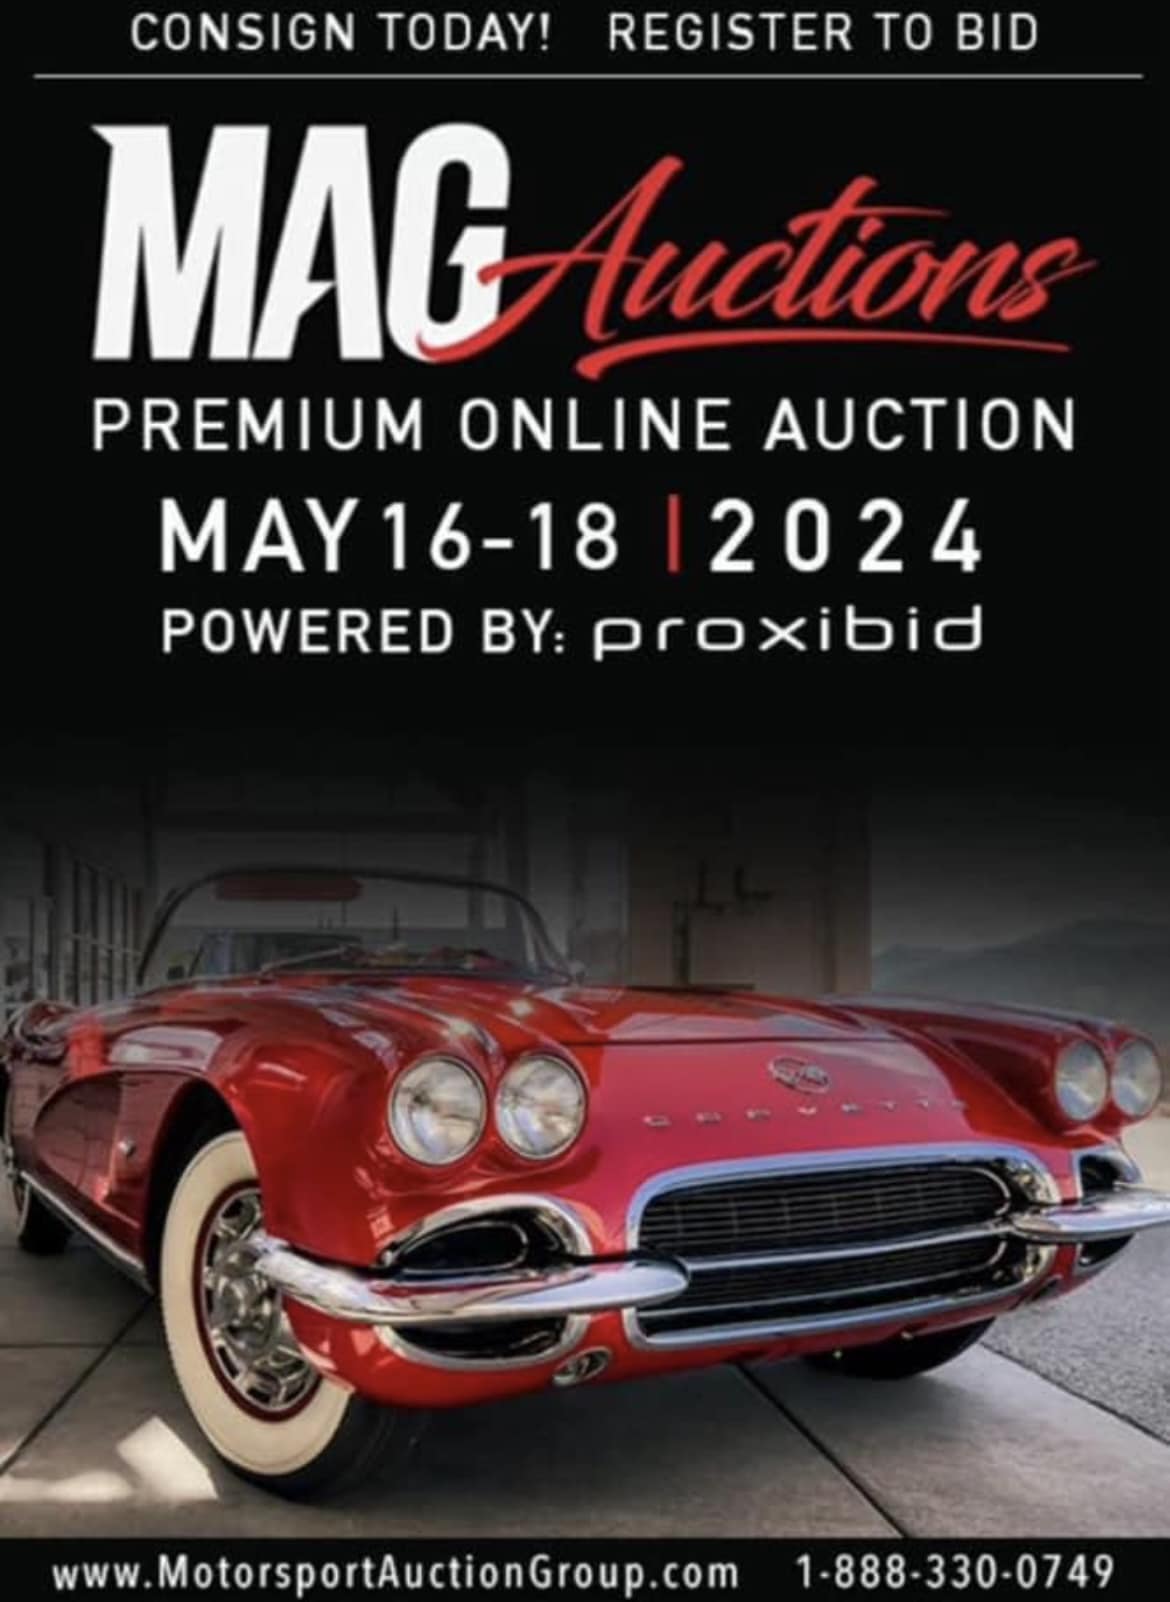 MAG Online Auction